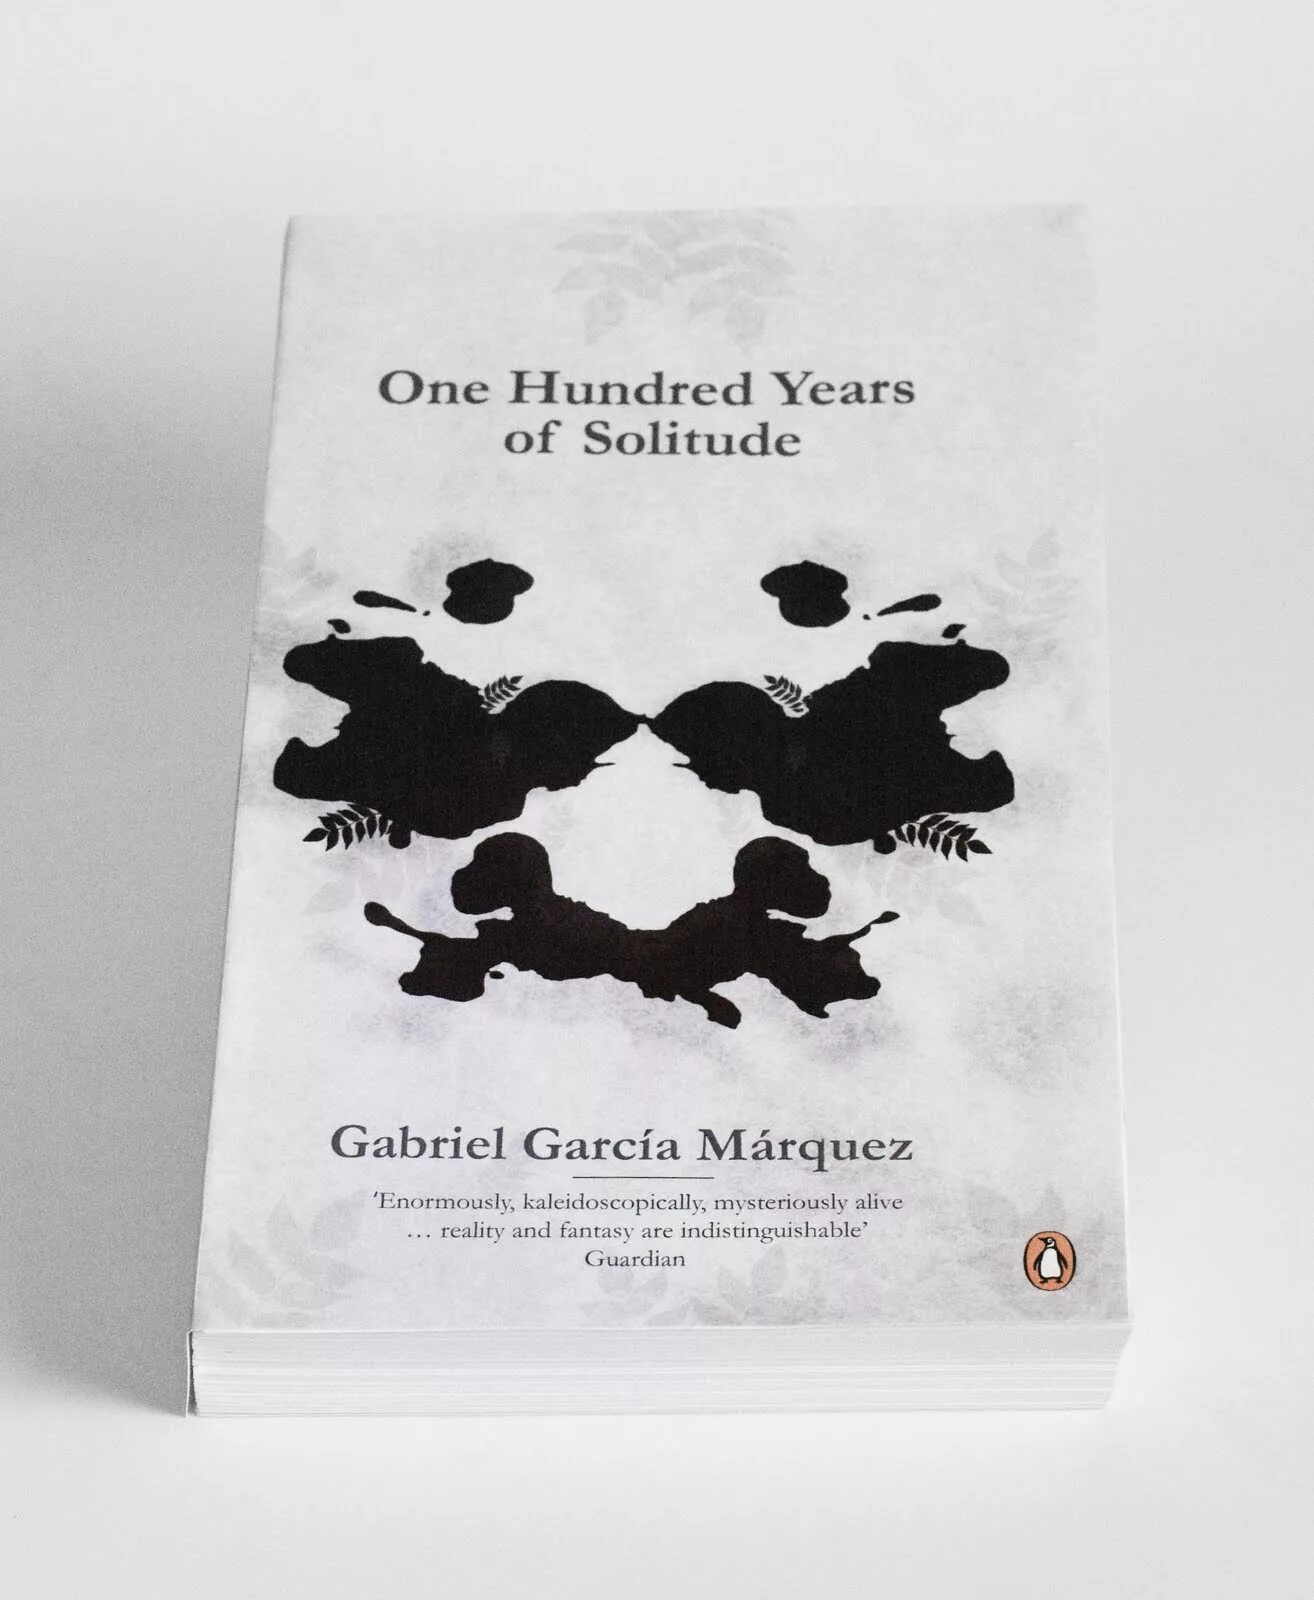 One hundred years is. Hundred years of Solitude. One hundred years of Solitude. One hundred years of Solitude by Gabriel Garcia Marquez. 100 Years of Solitude.